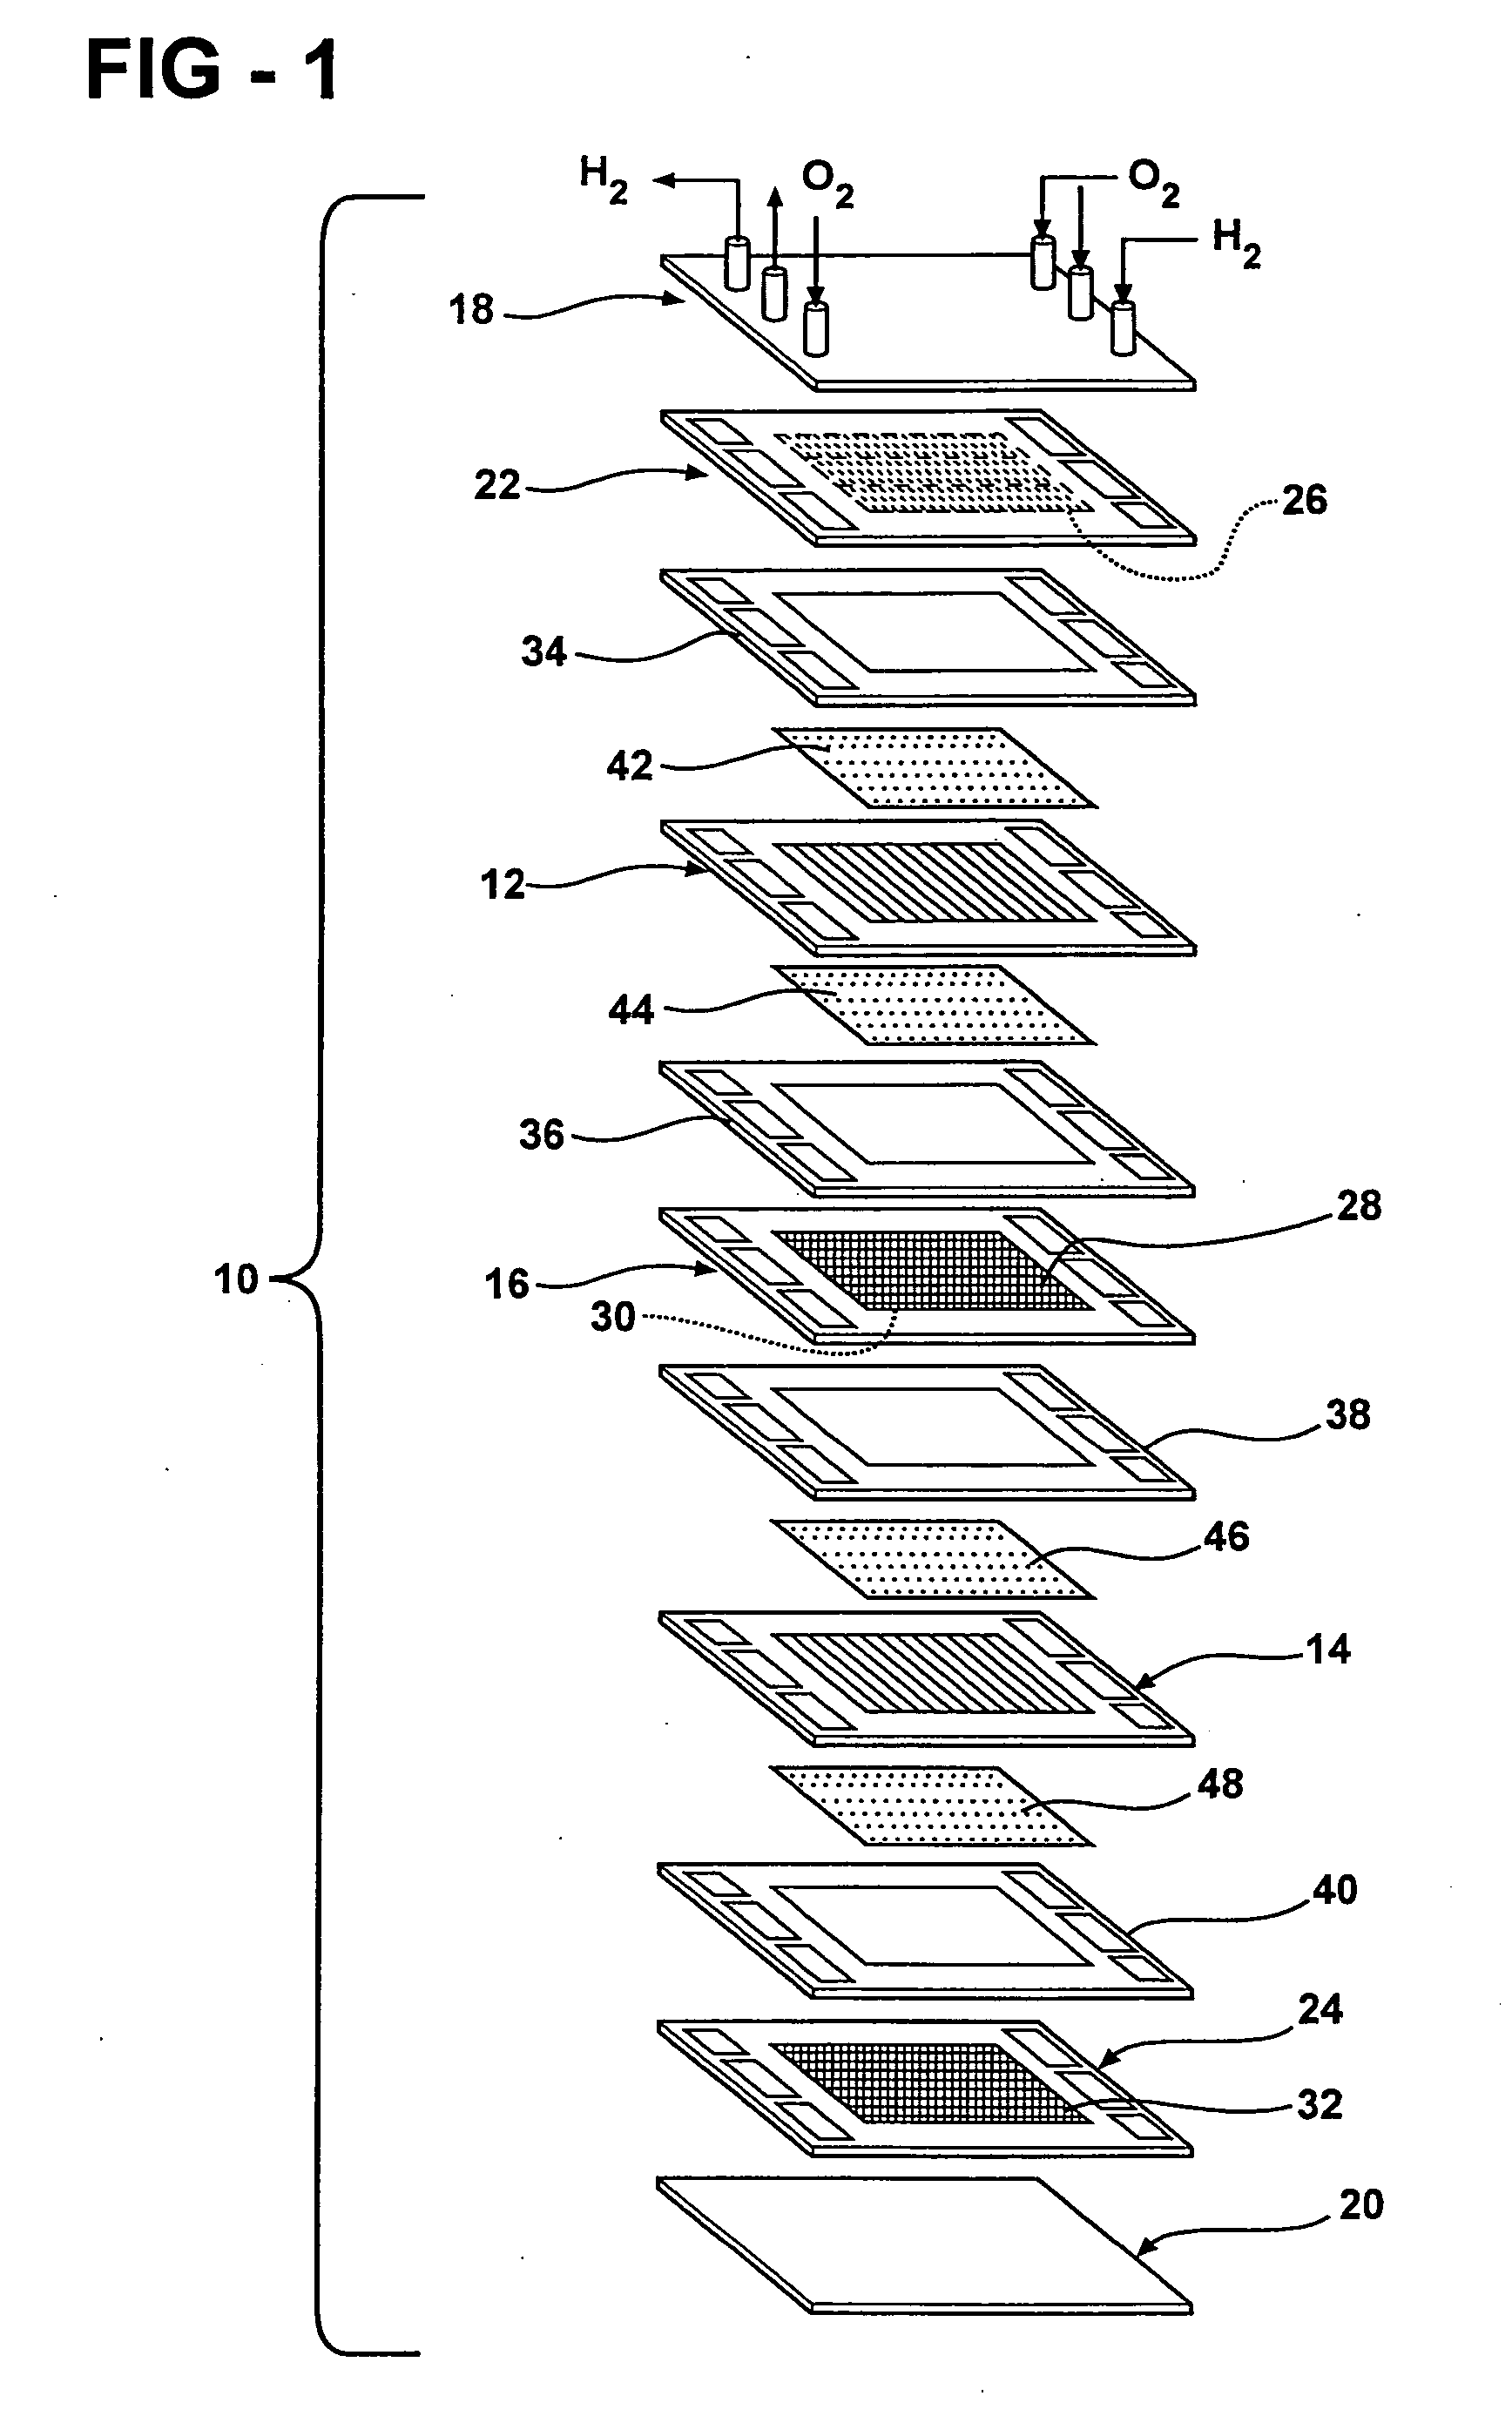 Balanced hydrogen feed for a fuel cell